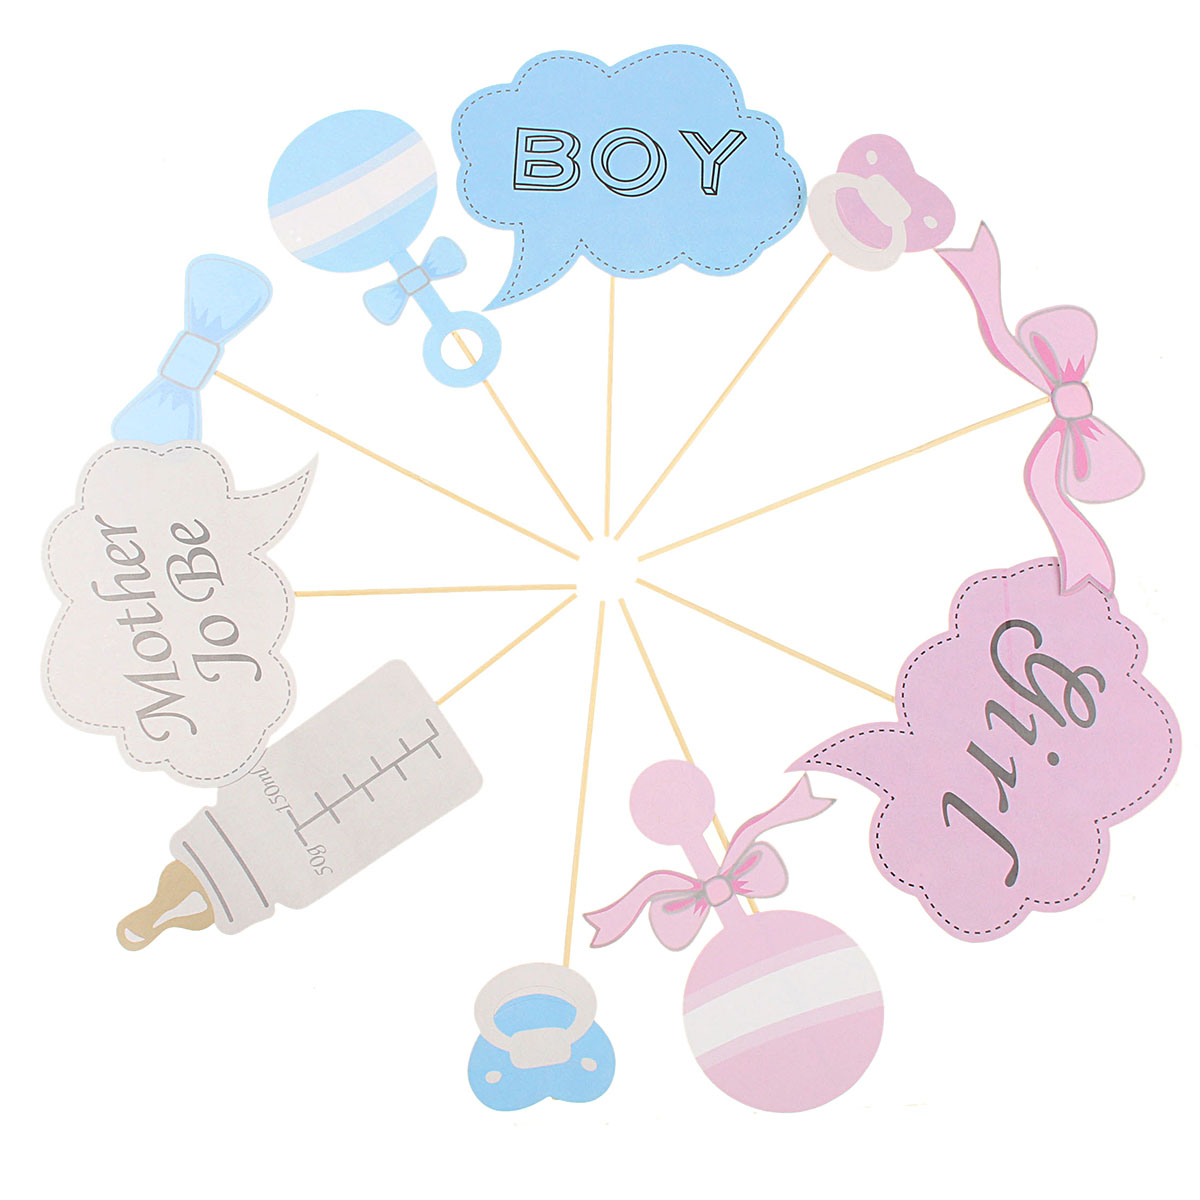 10Pcs-Baby-Shower-Photo-Booth-Props-Little-Girl-Mini-Boy-New-Born-Wedding-Party-Decoration-1069354